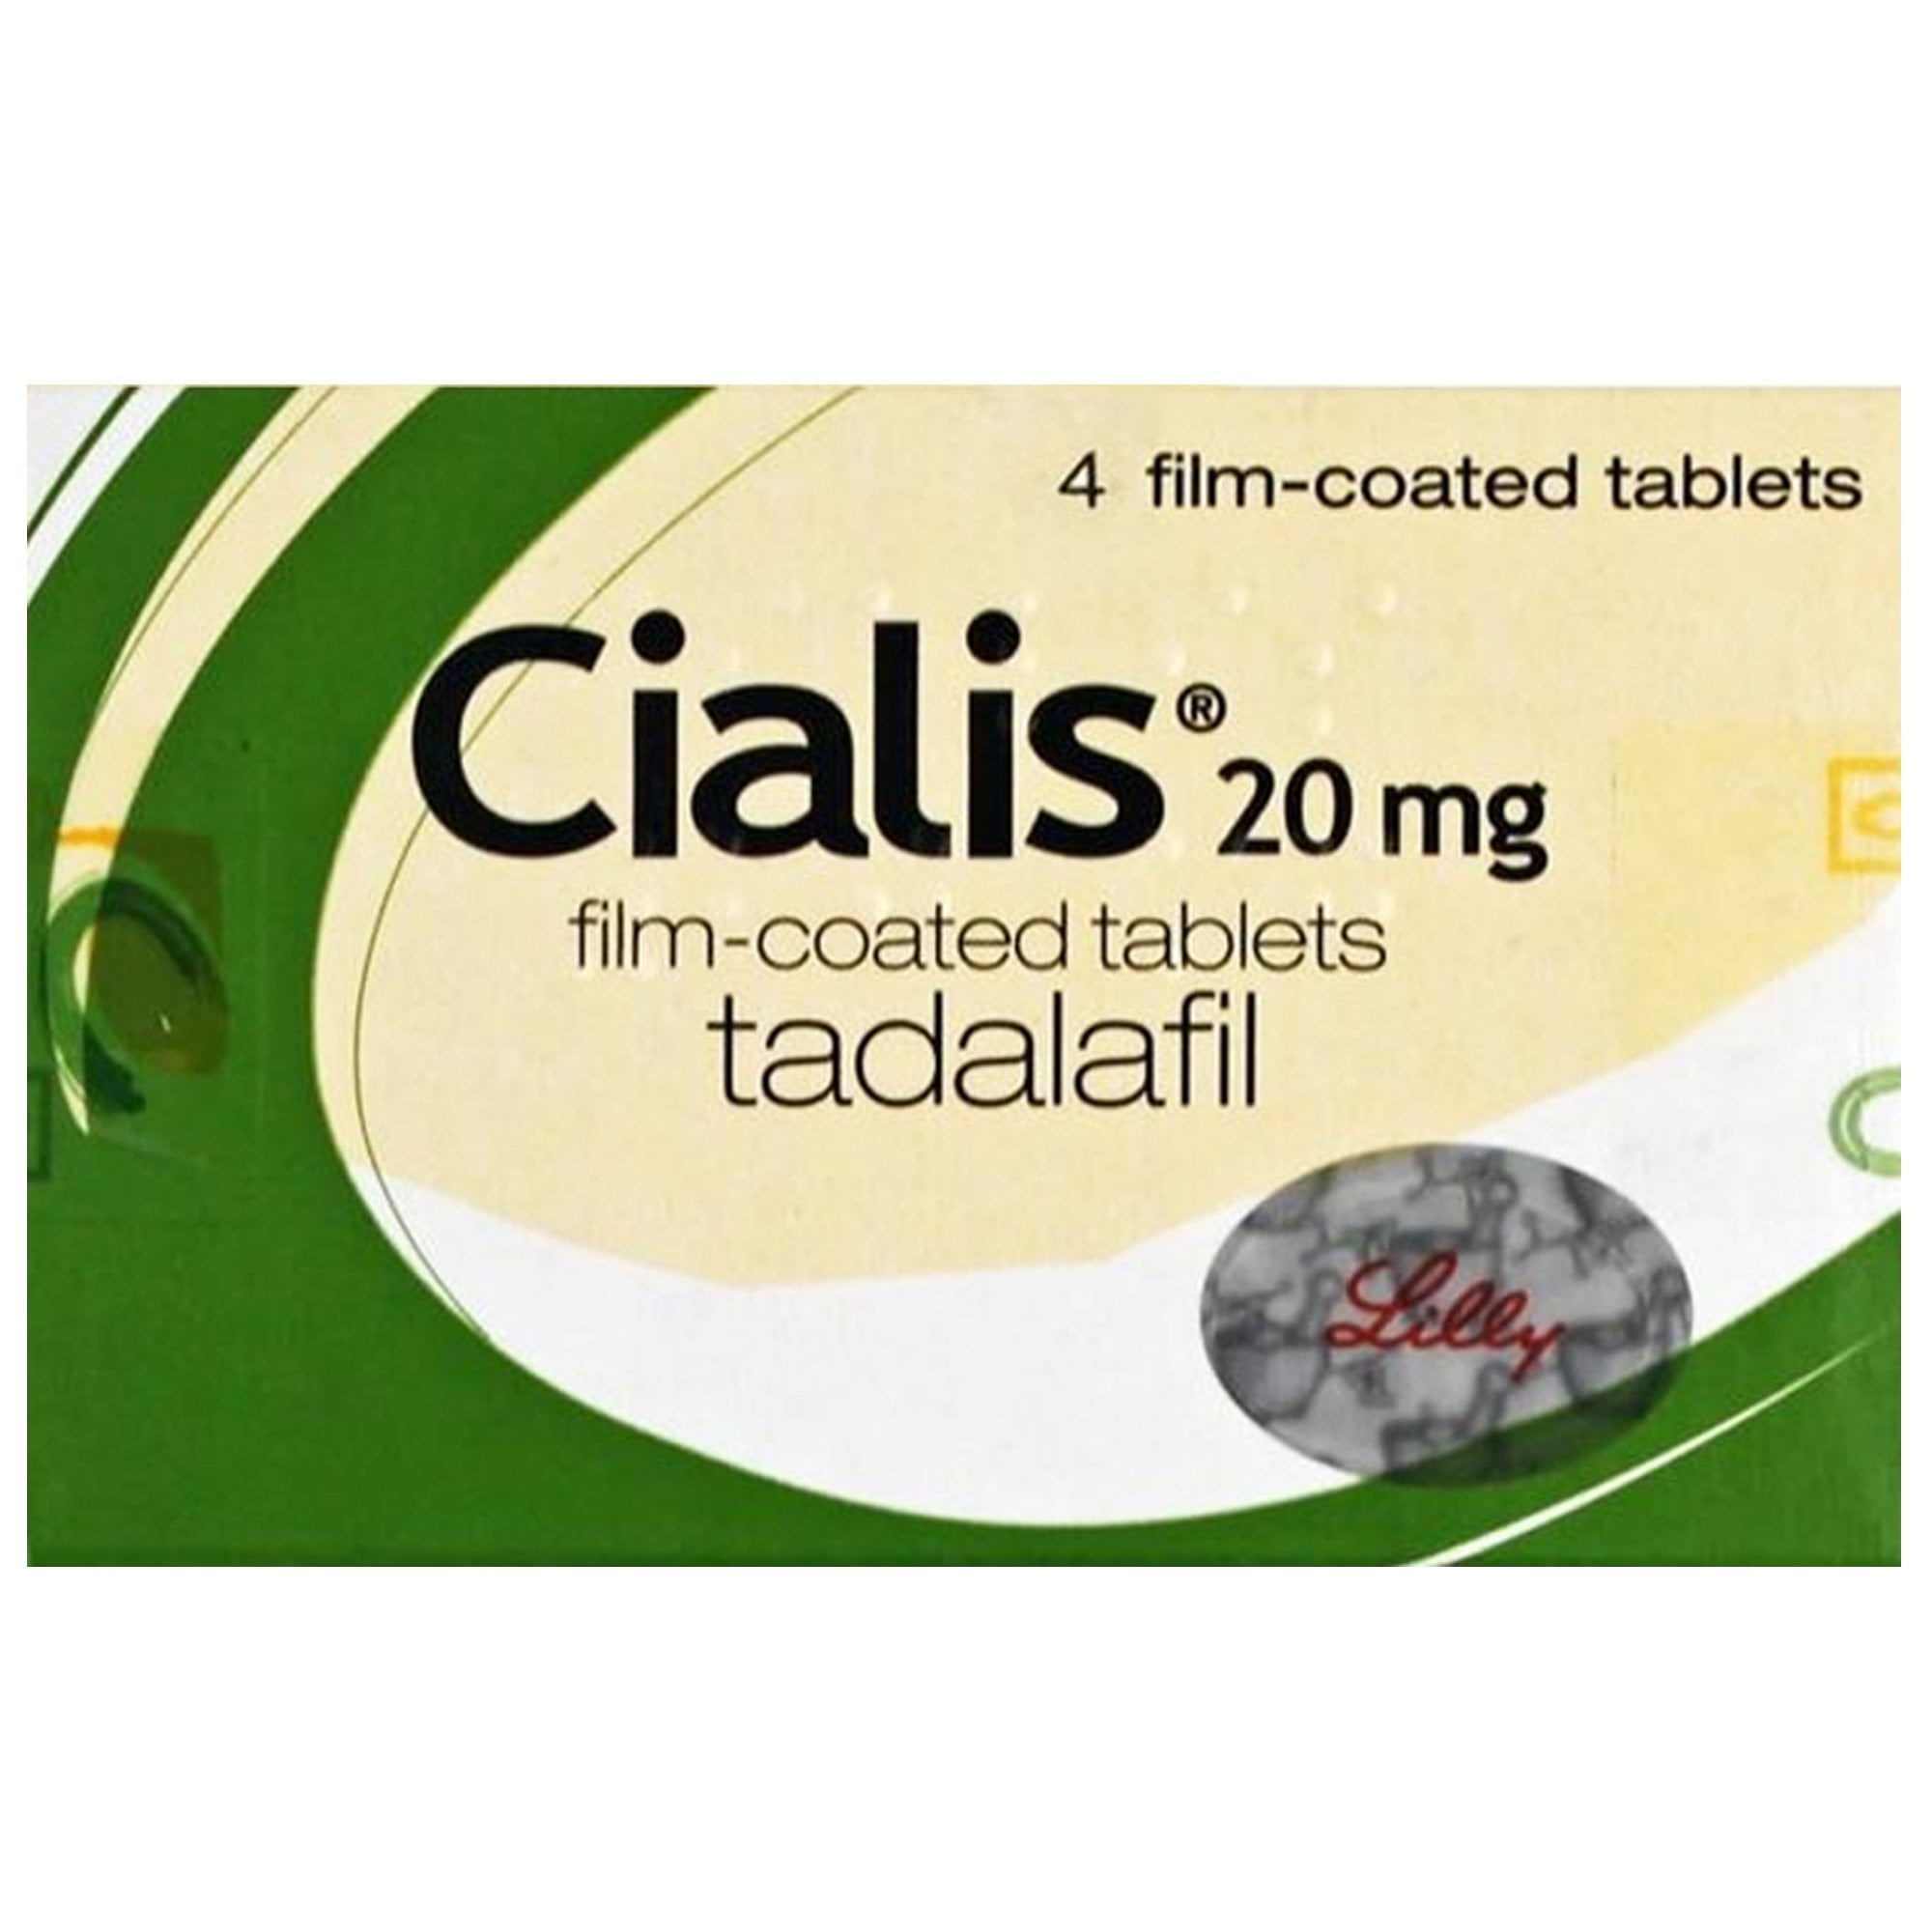 <strong>What is Cialis 20mg used for?</strong>